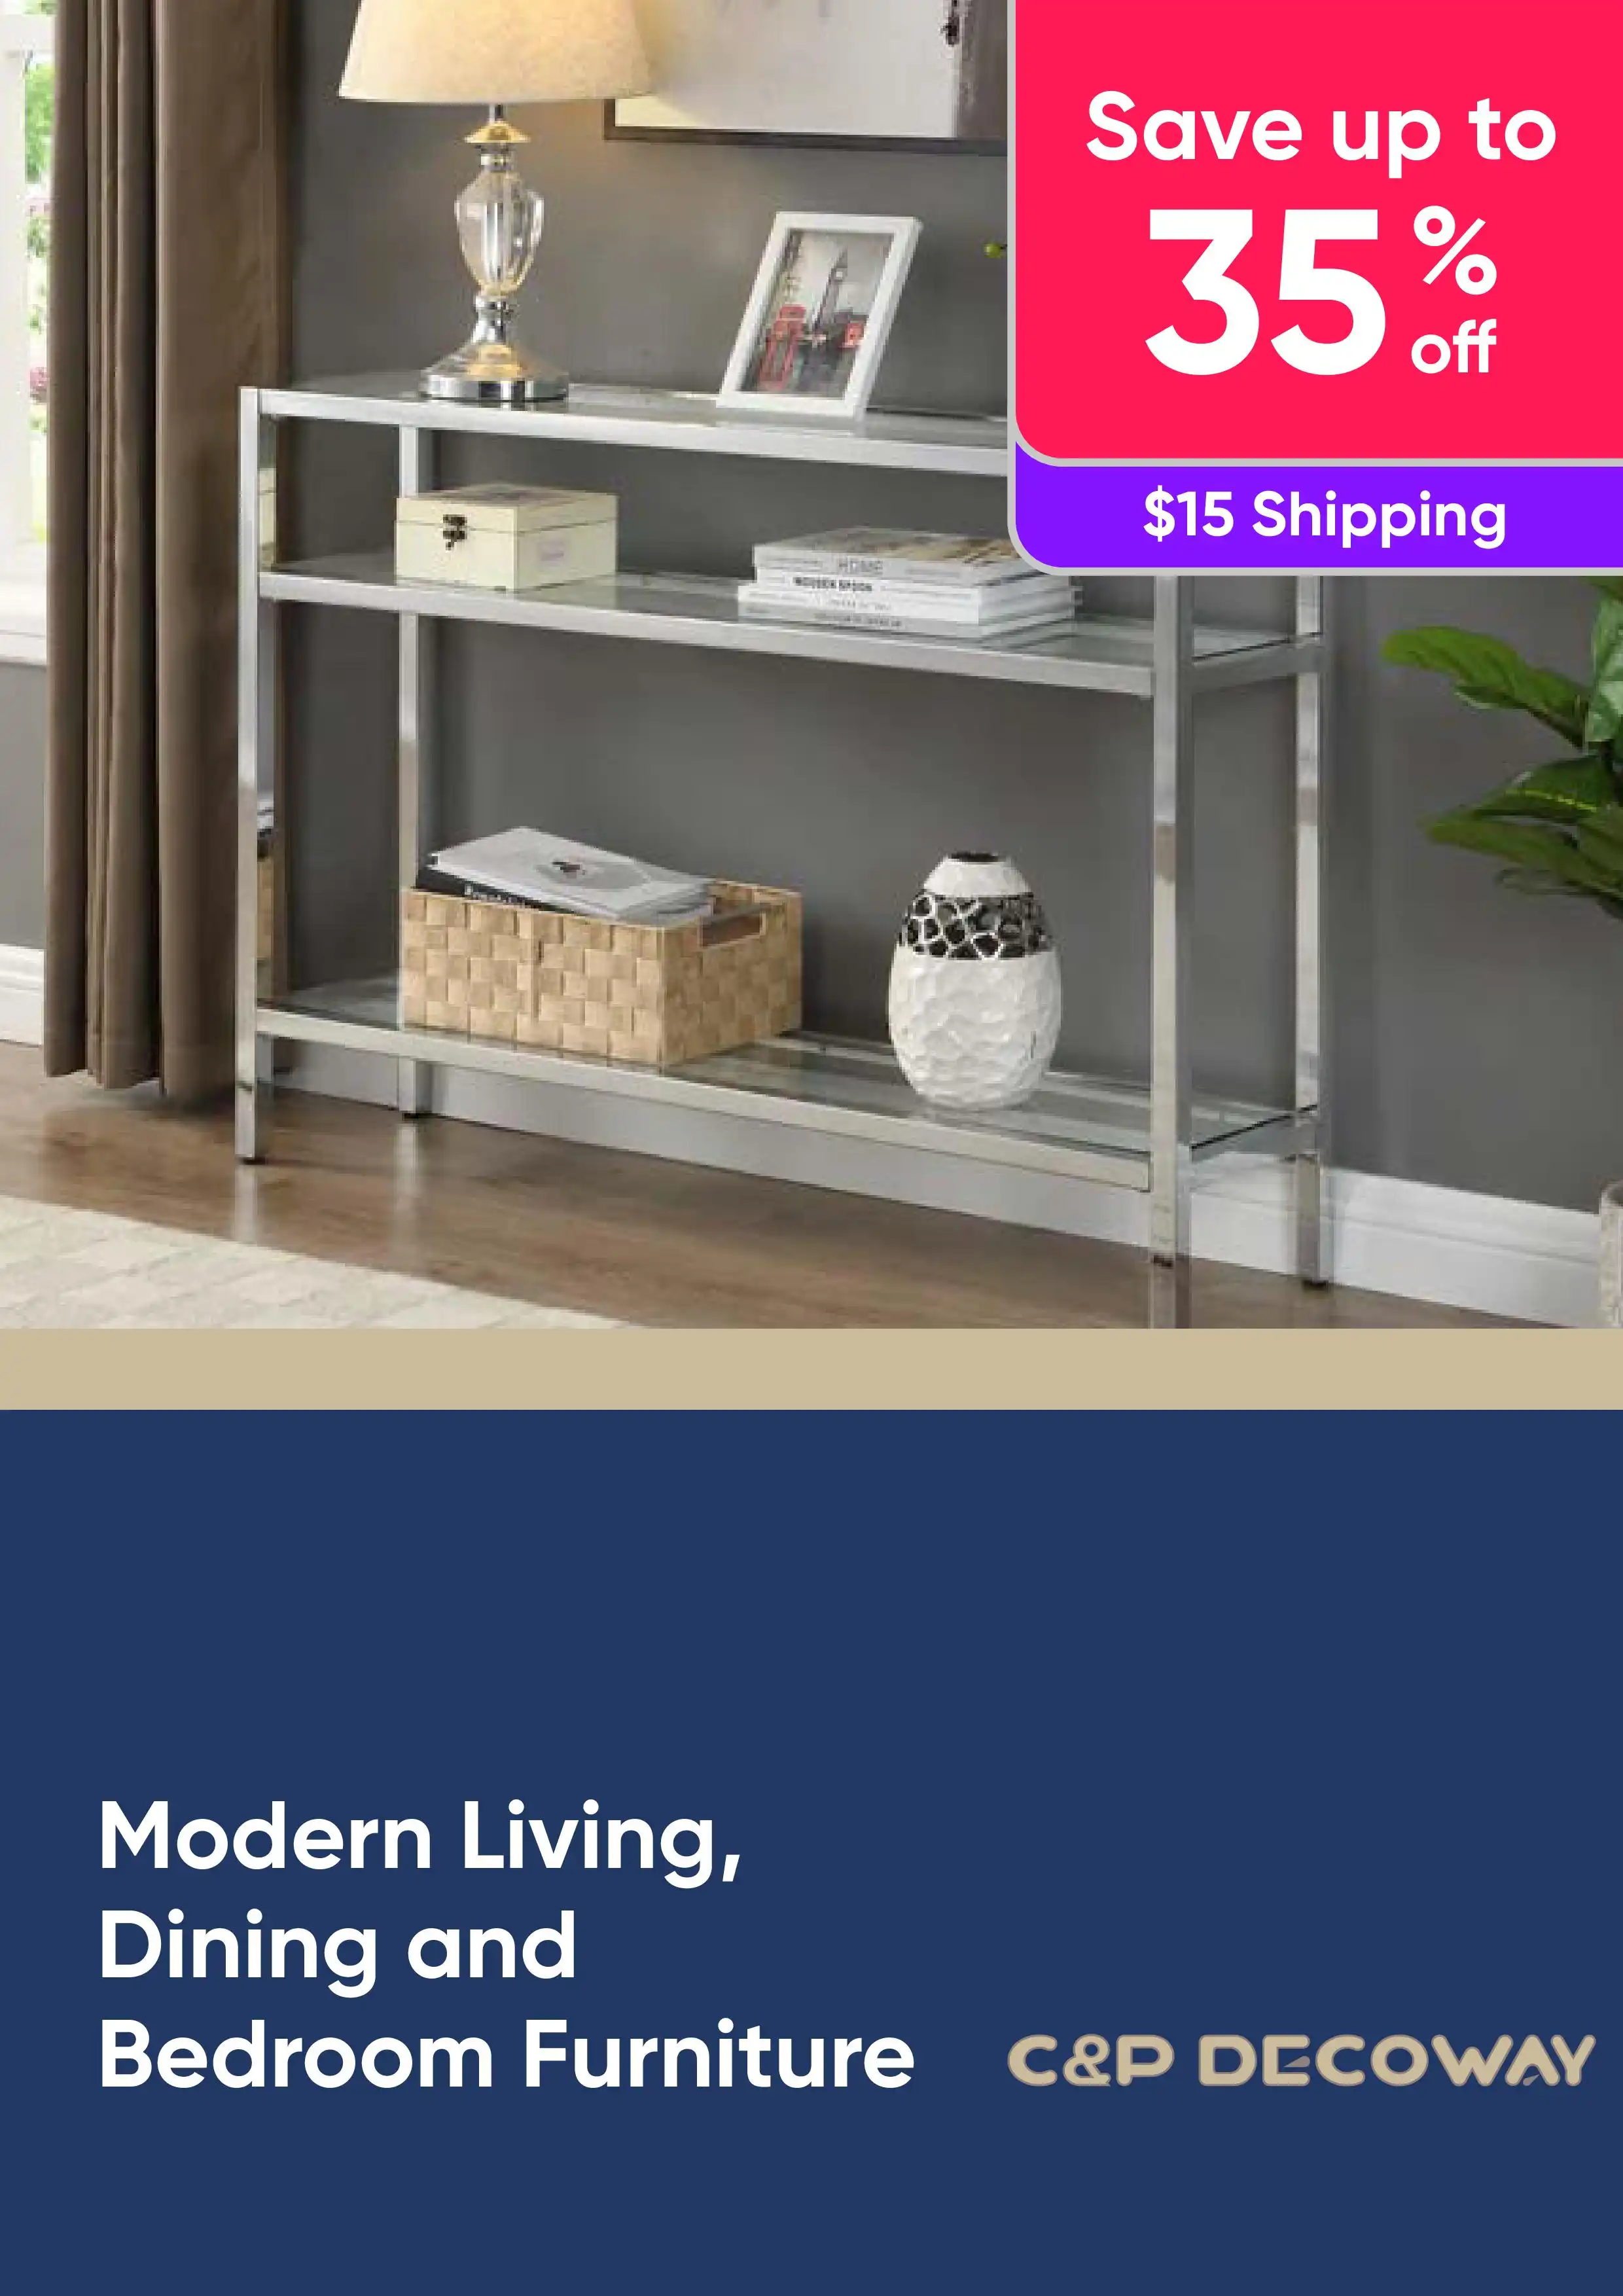 Save Up To 35% Off Modern Living, Dining and Bedroom Furniture